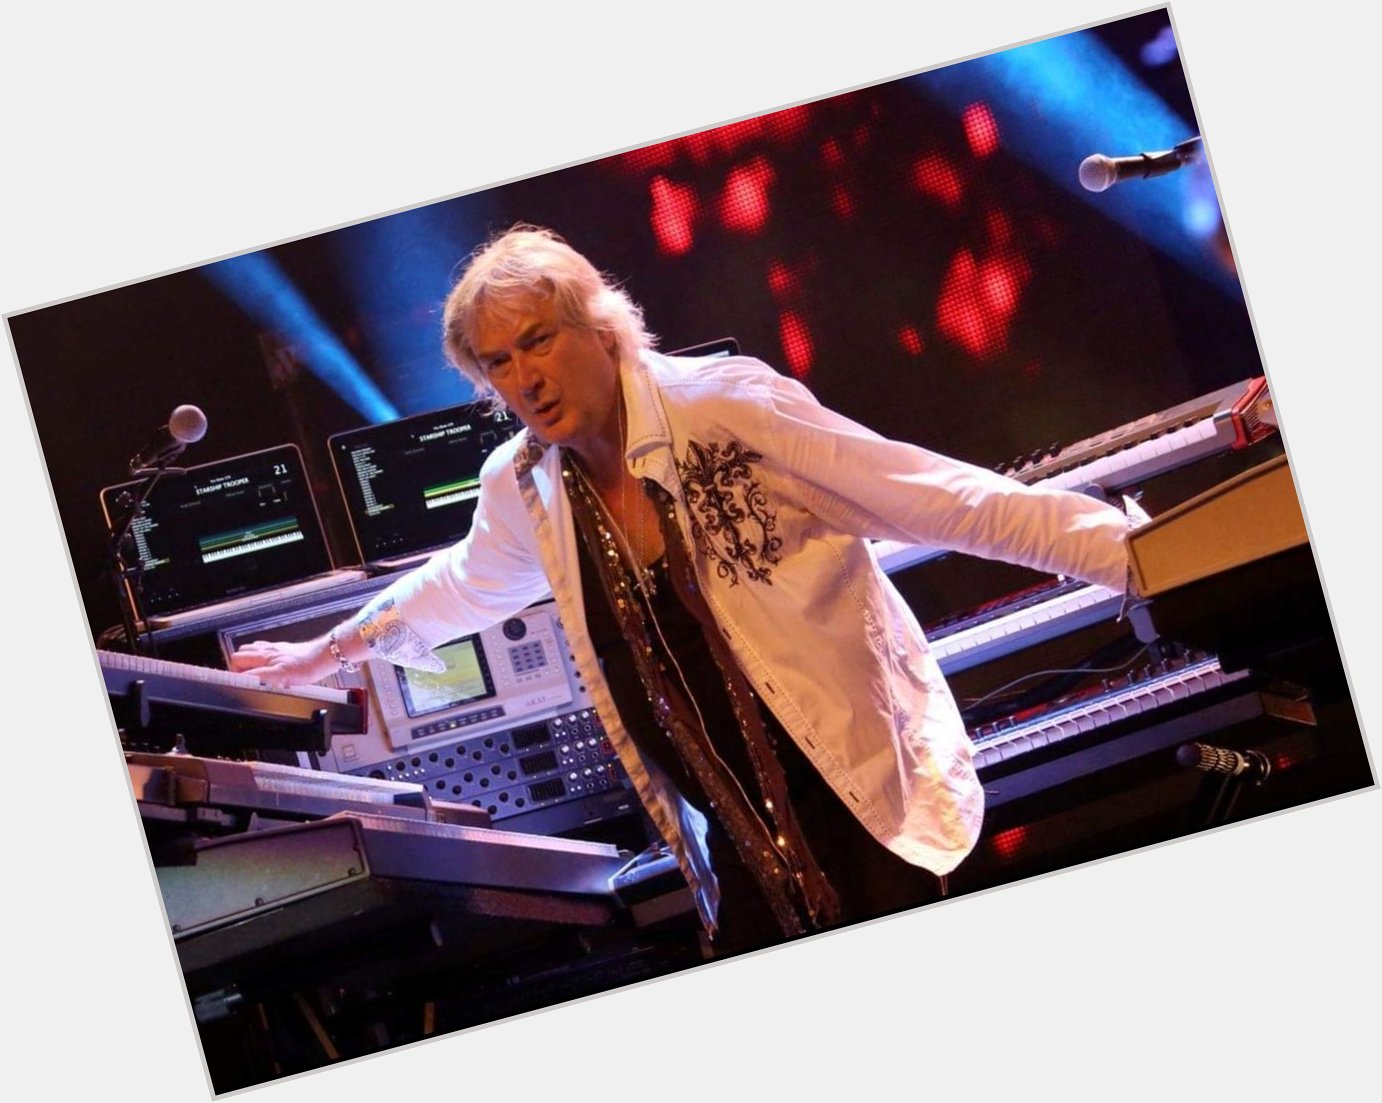 Happy 70th birthday to the great composer. keyboardist and friend Geoff Downes       